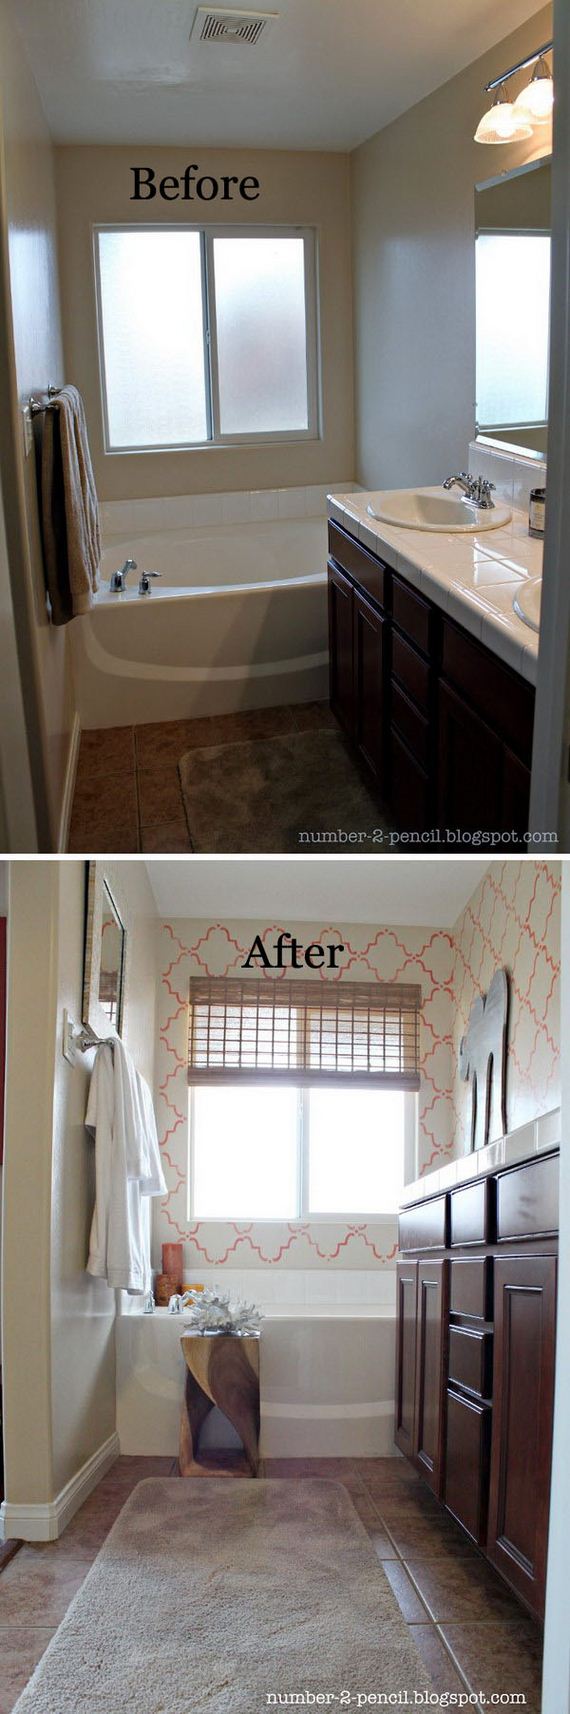 19-awesome-bathroom-makeovers